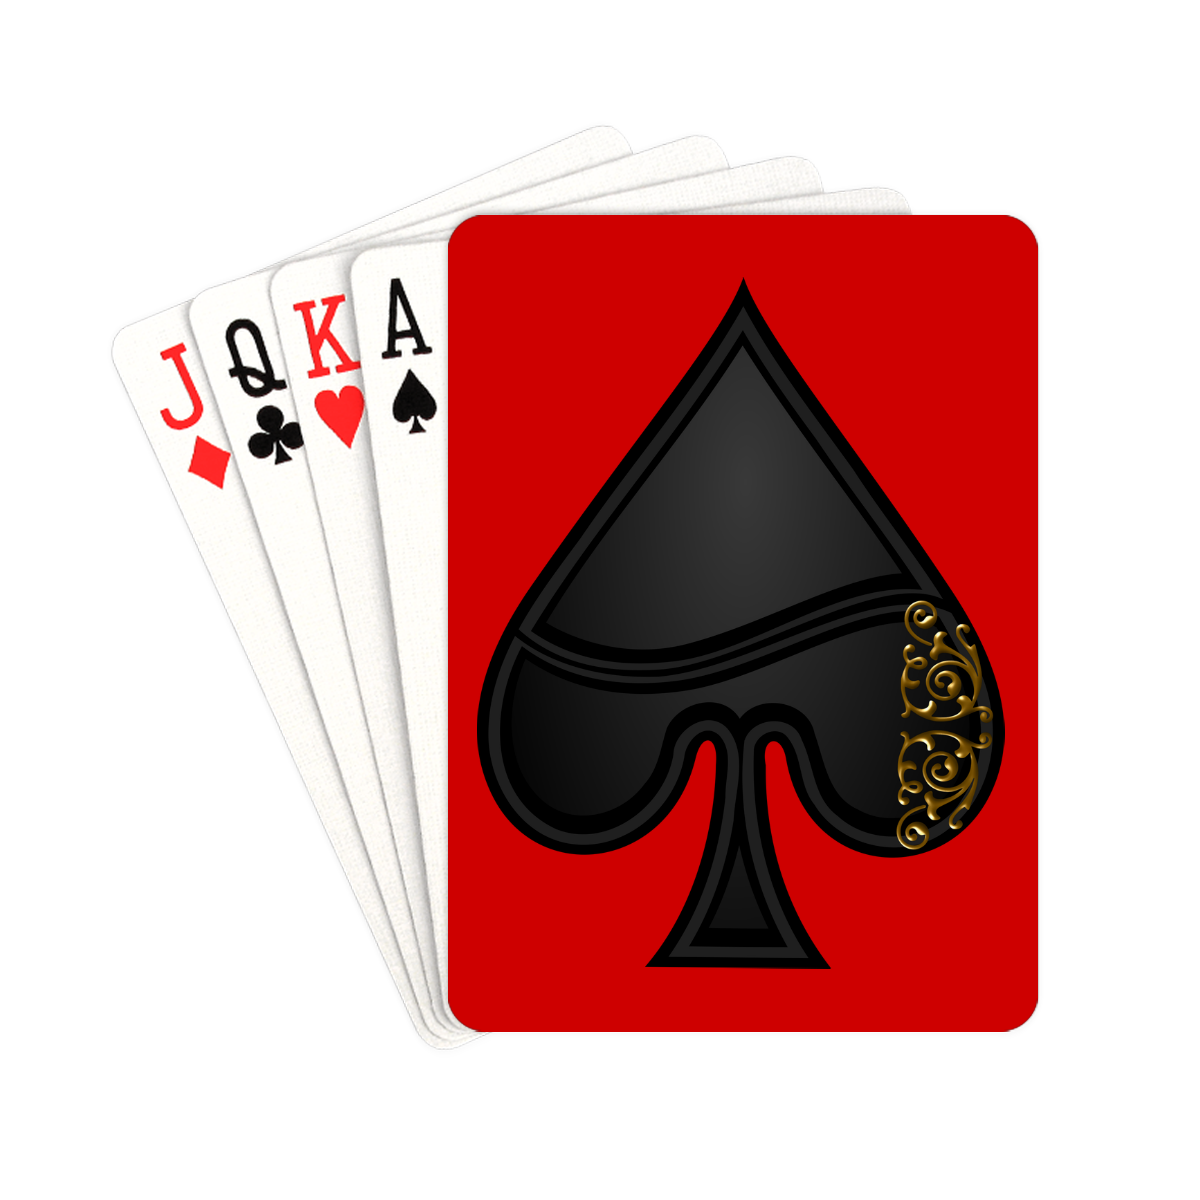 Spade Las Vegas Playing Card Shape on Red Playing Cards 2.5"x3.5"